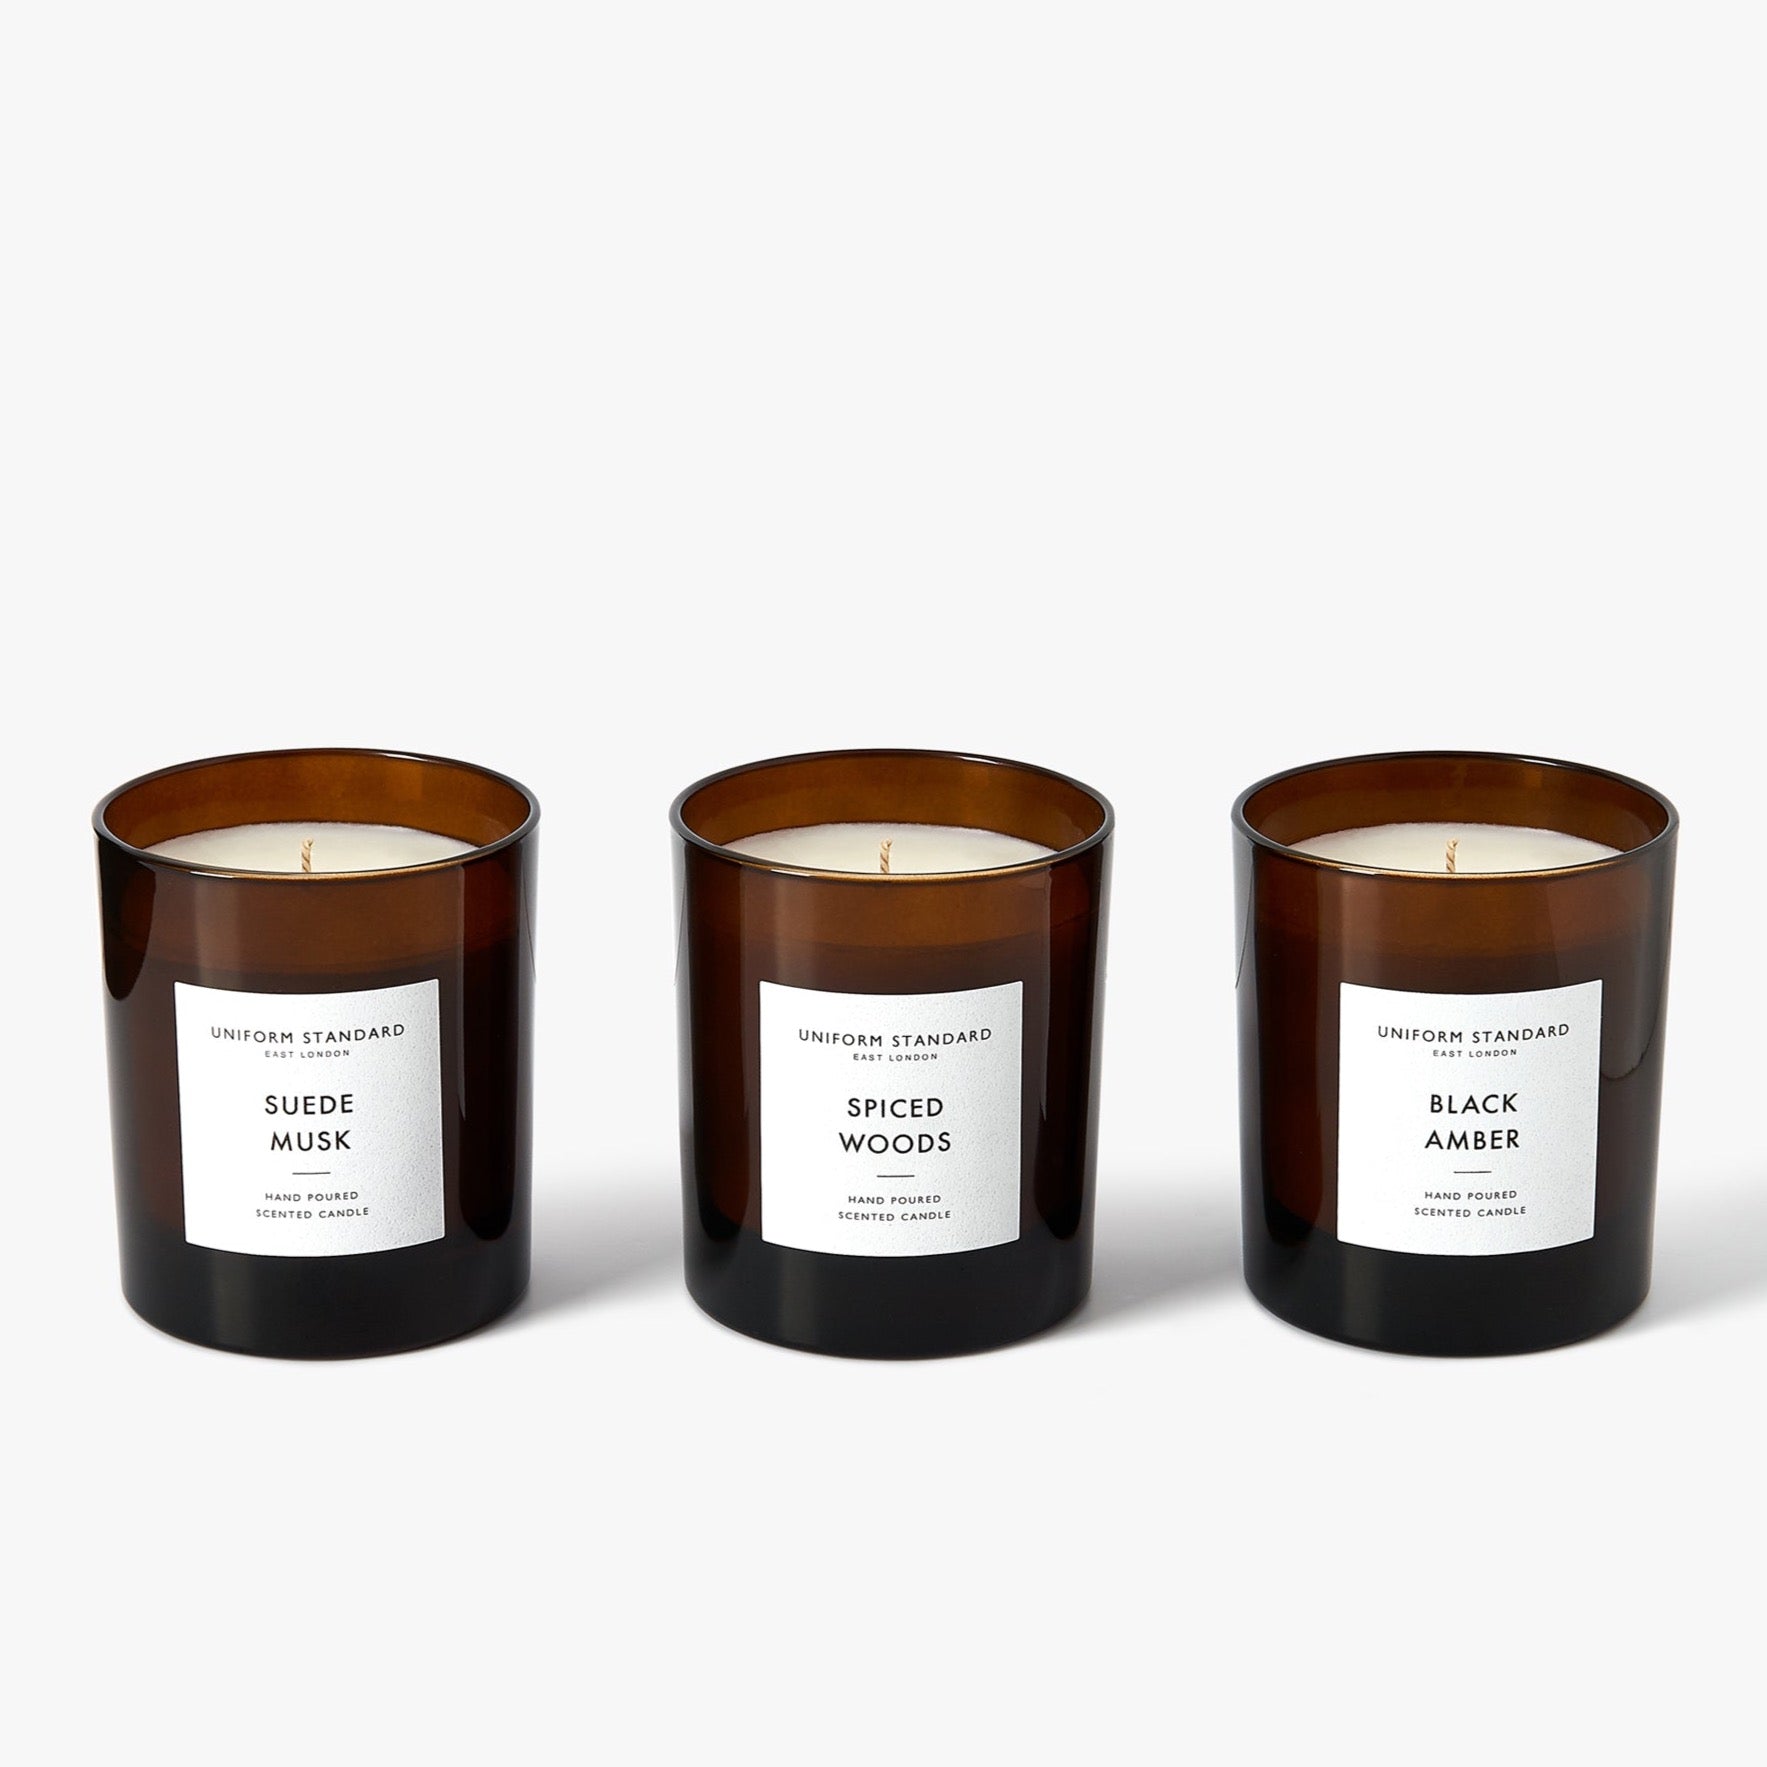 Suede Musk Scented Candle